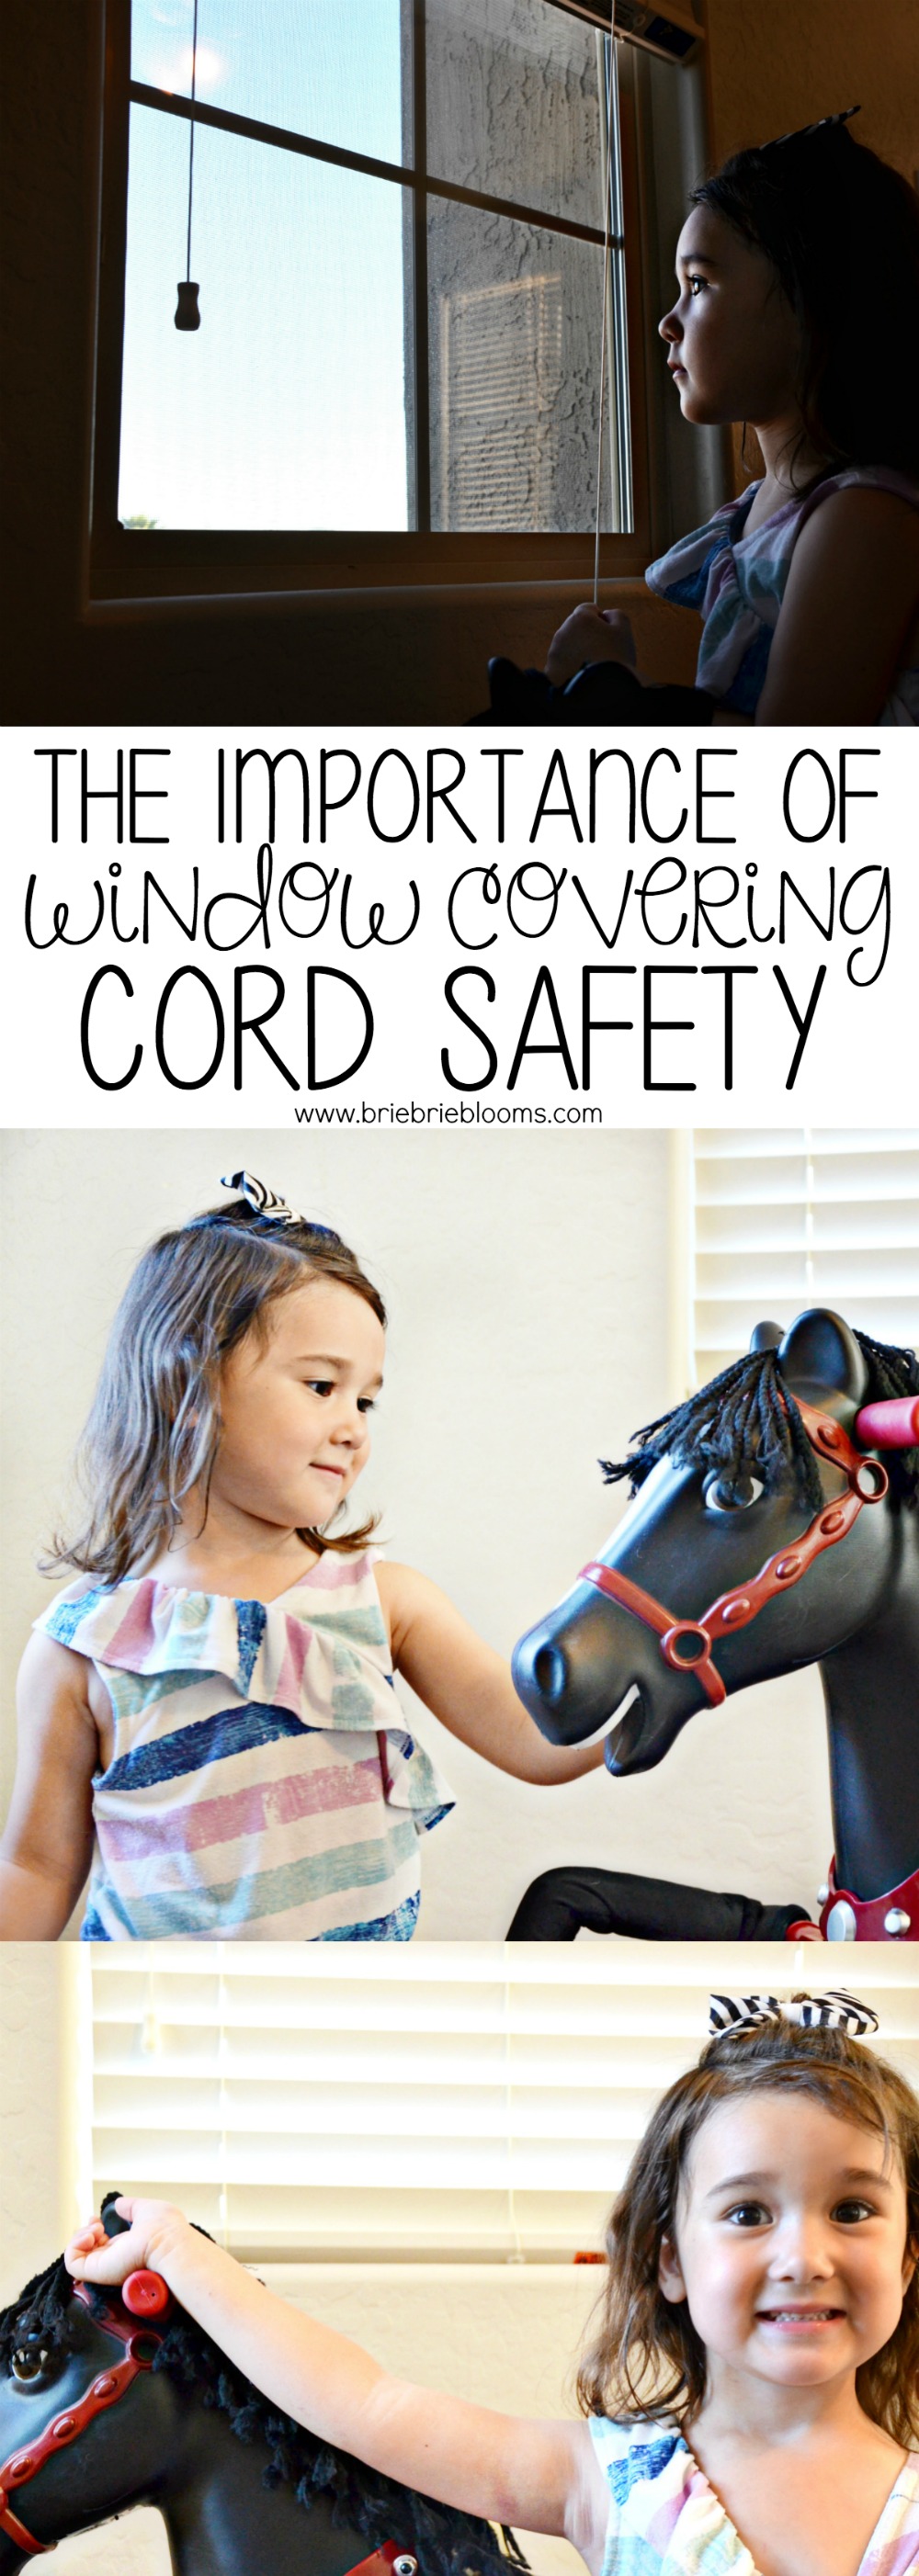 Parents and caregivers much recognize the importance of window covering cord safety with the hazard of strangulation to infants and young children.